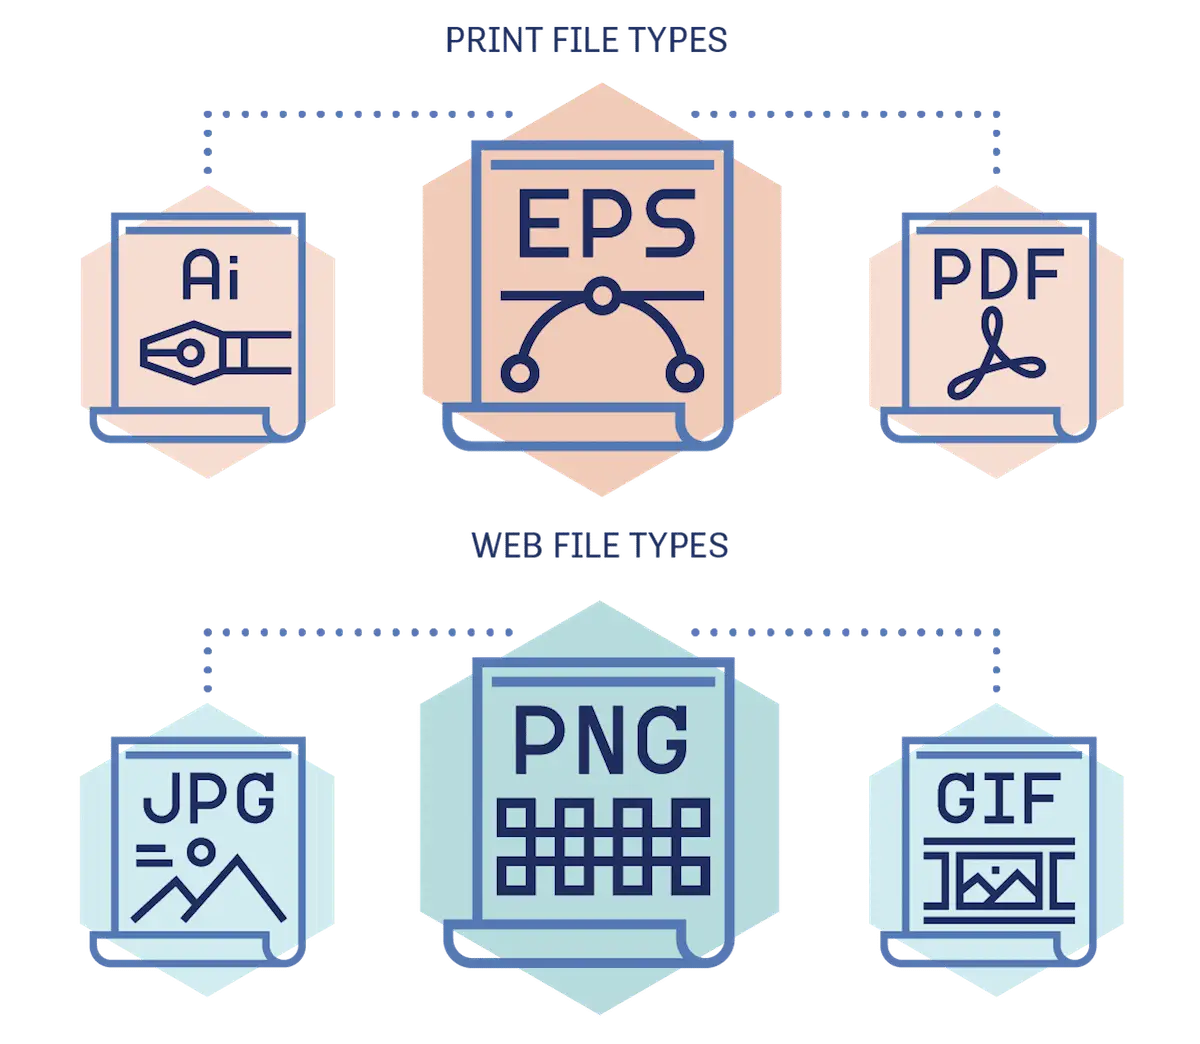 Graphic of pieces of paper with different kind of print file type (such as EPS and PDF) or web file type (such as JPG and PNG) listed on each document